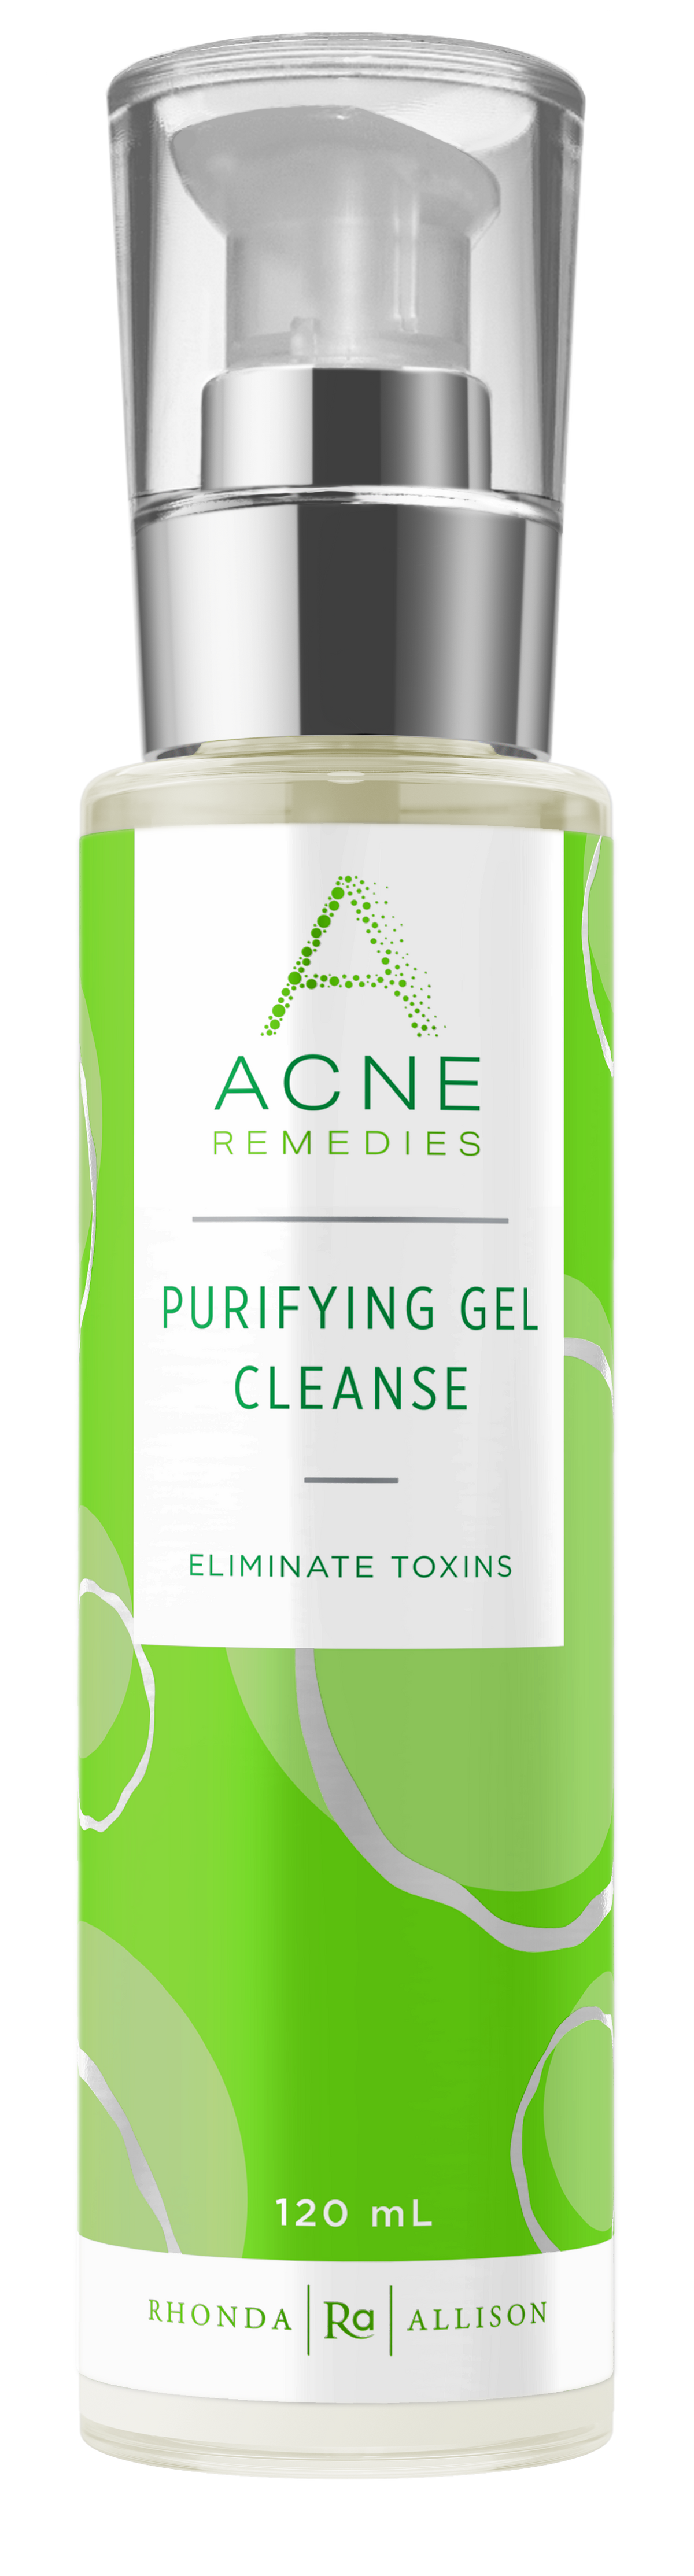 Purifying Gel Cleanse - 15% off